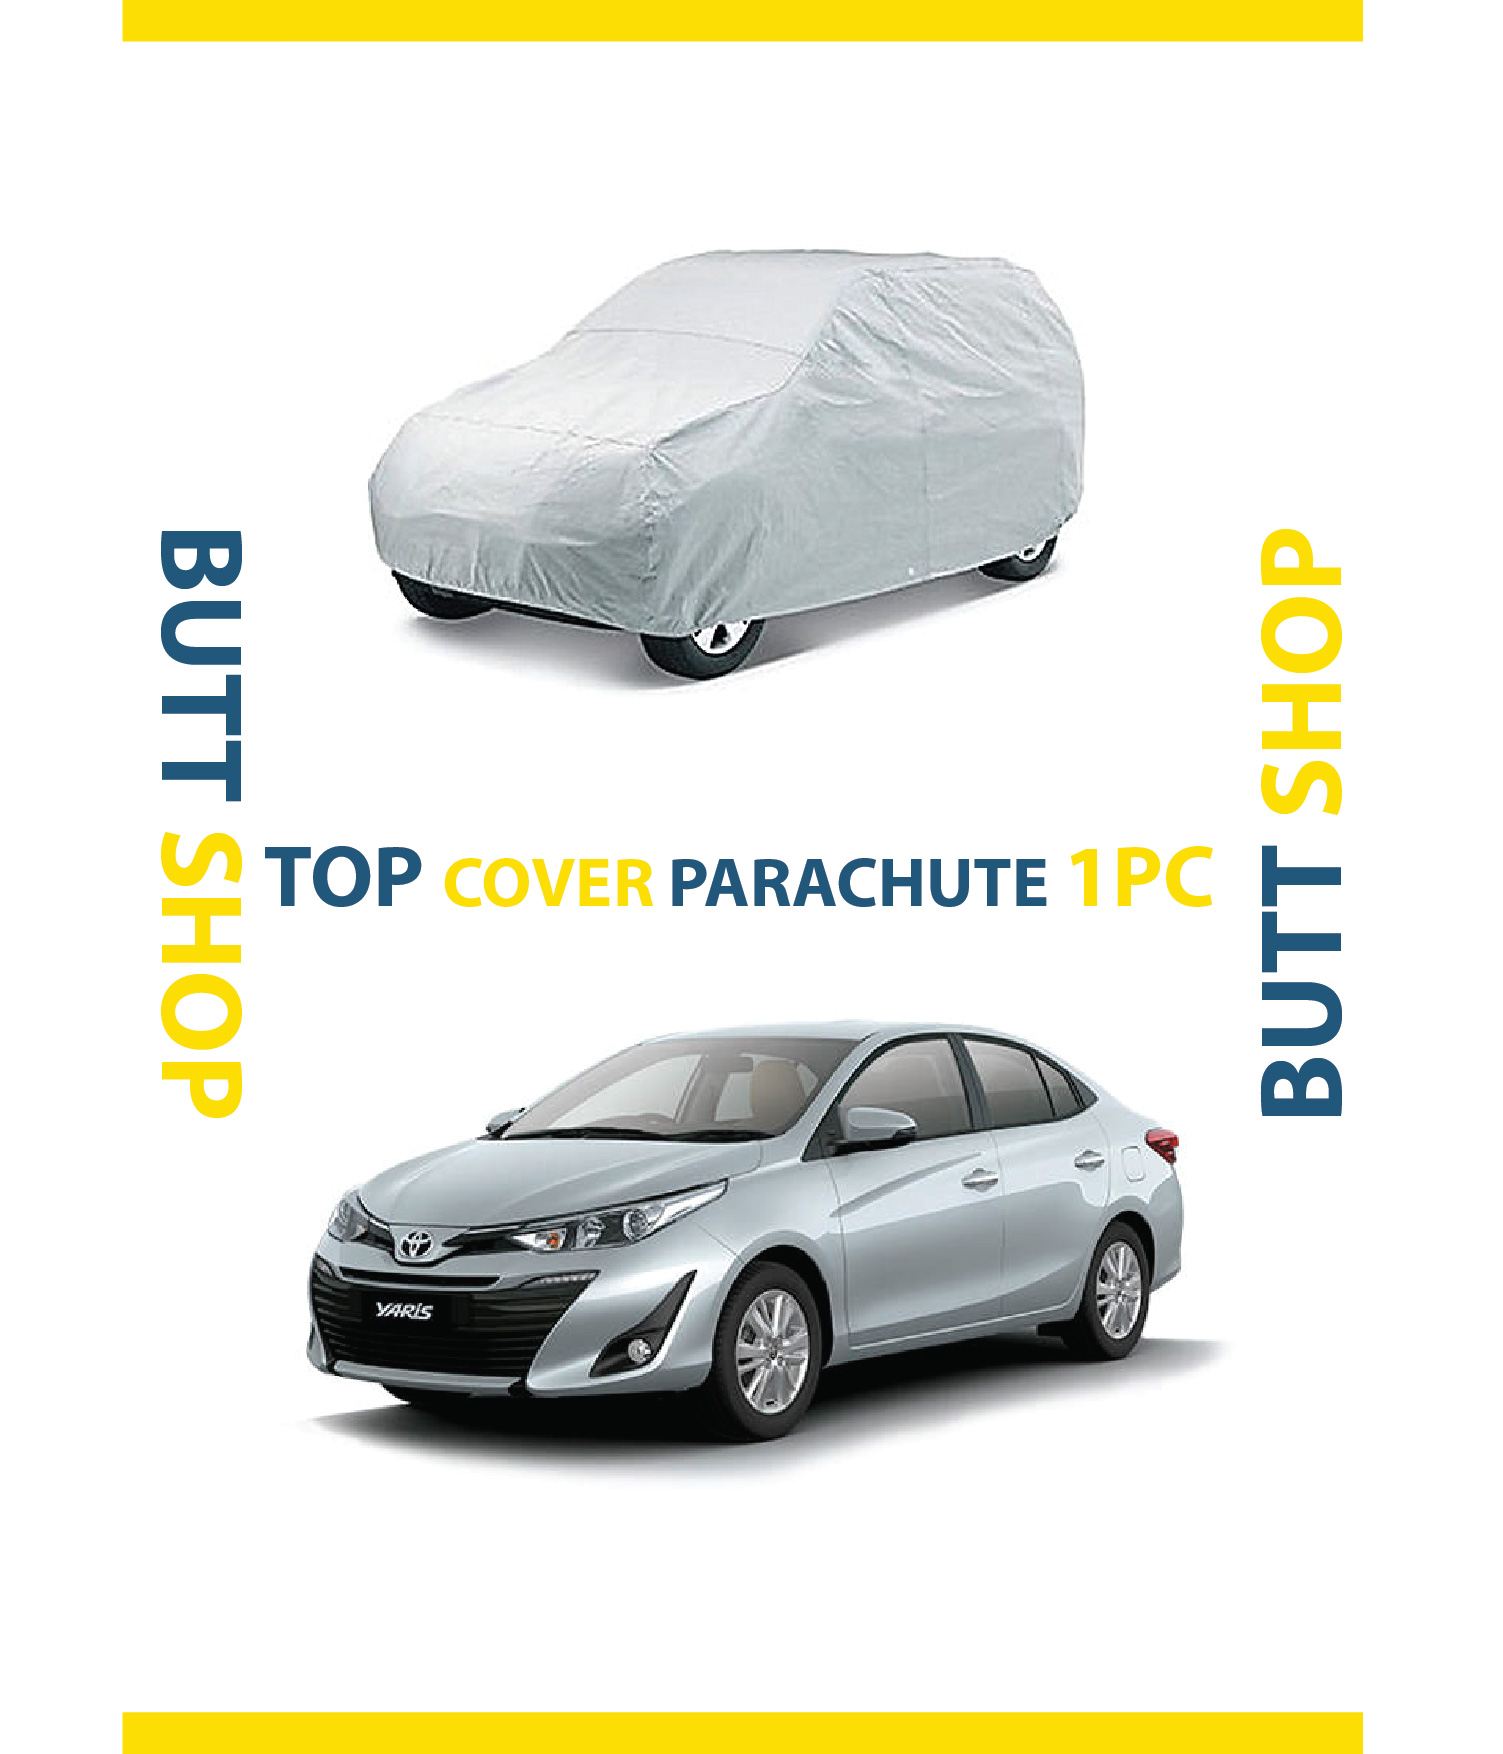 TOYOTA YARIS TOP COVER / BODY COVER PARACHUTE 1PC